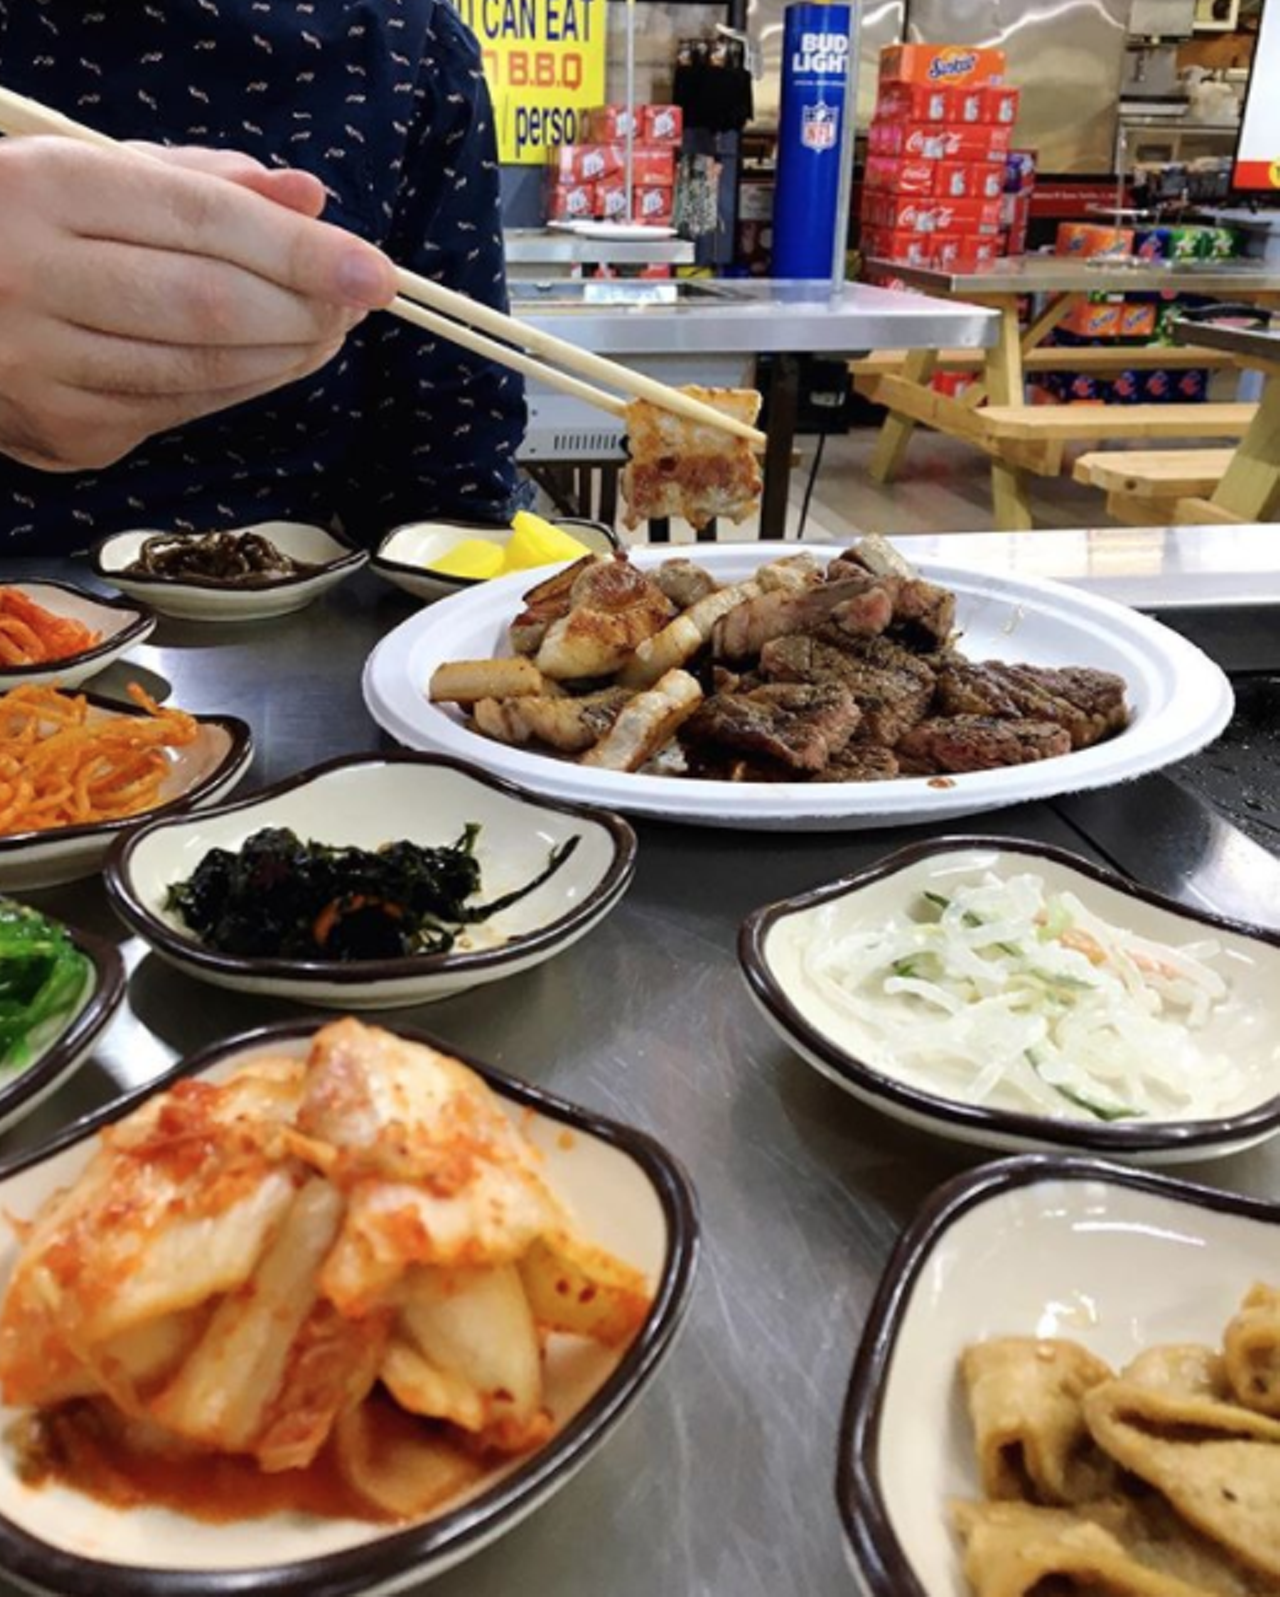 Chas Market & Kitchen
1431 N Pine Street, (210) 227-1521
Your visit to Chas won’t be complete without devouring some Korean BBQ beef short ribs, or perhaps the teriyaki if you don’t want something so messy.
Photo via jesselizarraras / Instagram